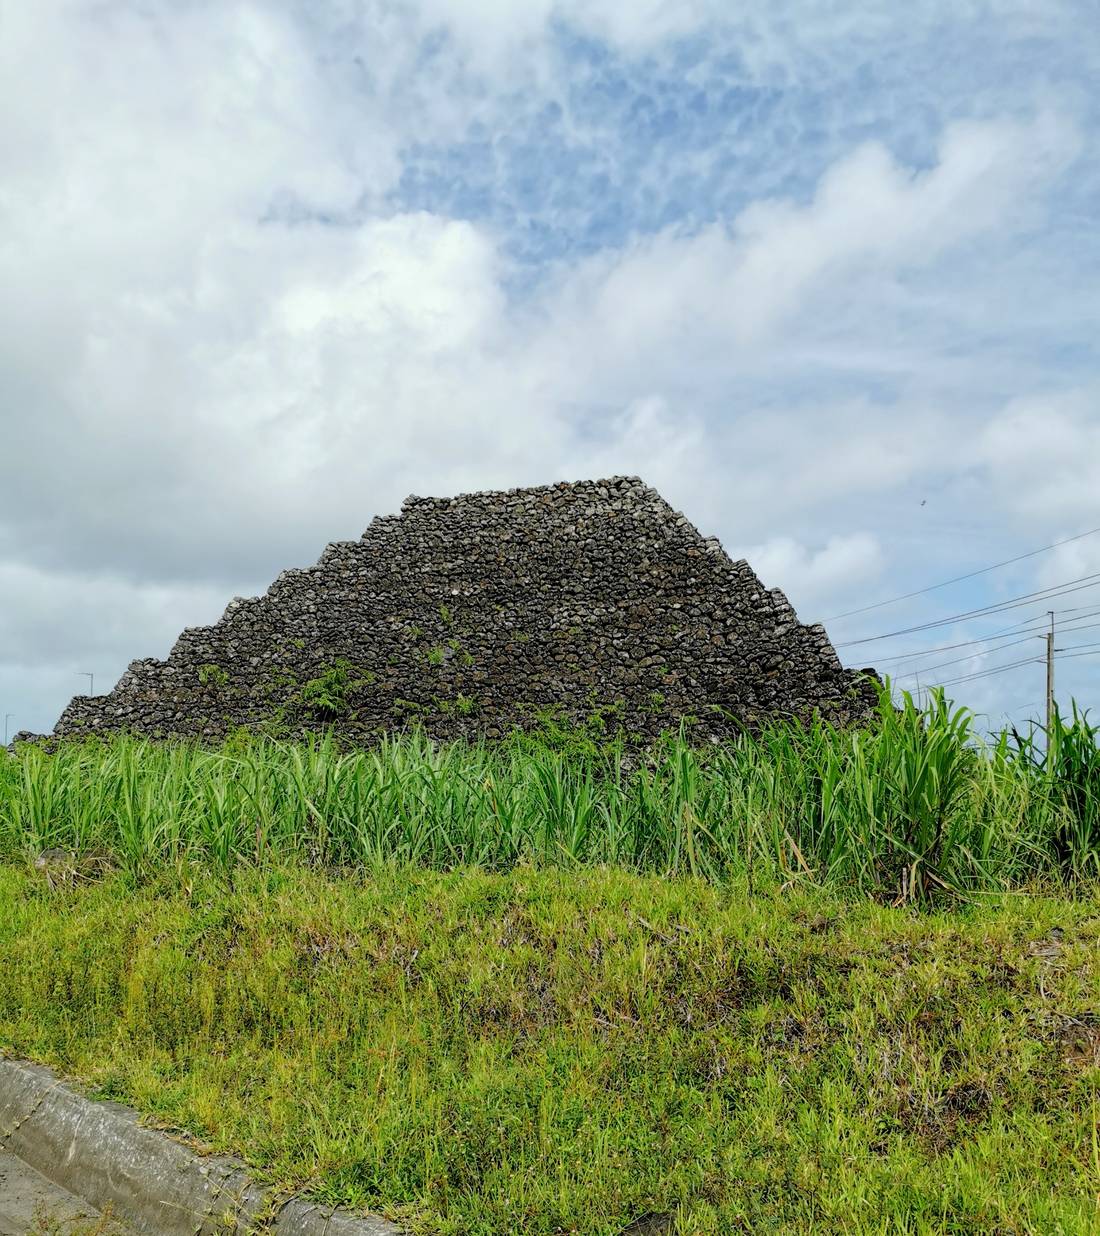 One of the 7 pyramids of Mauritius!